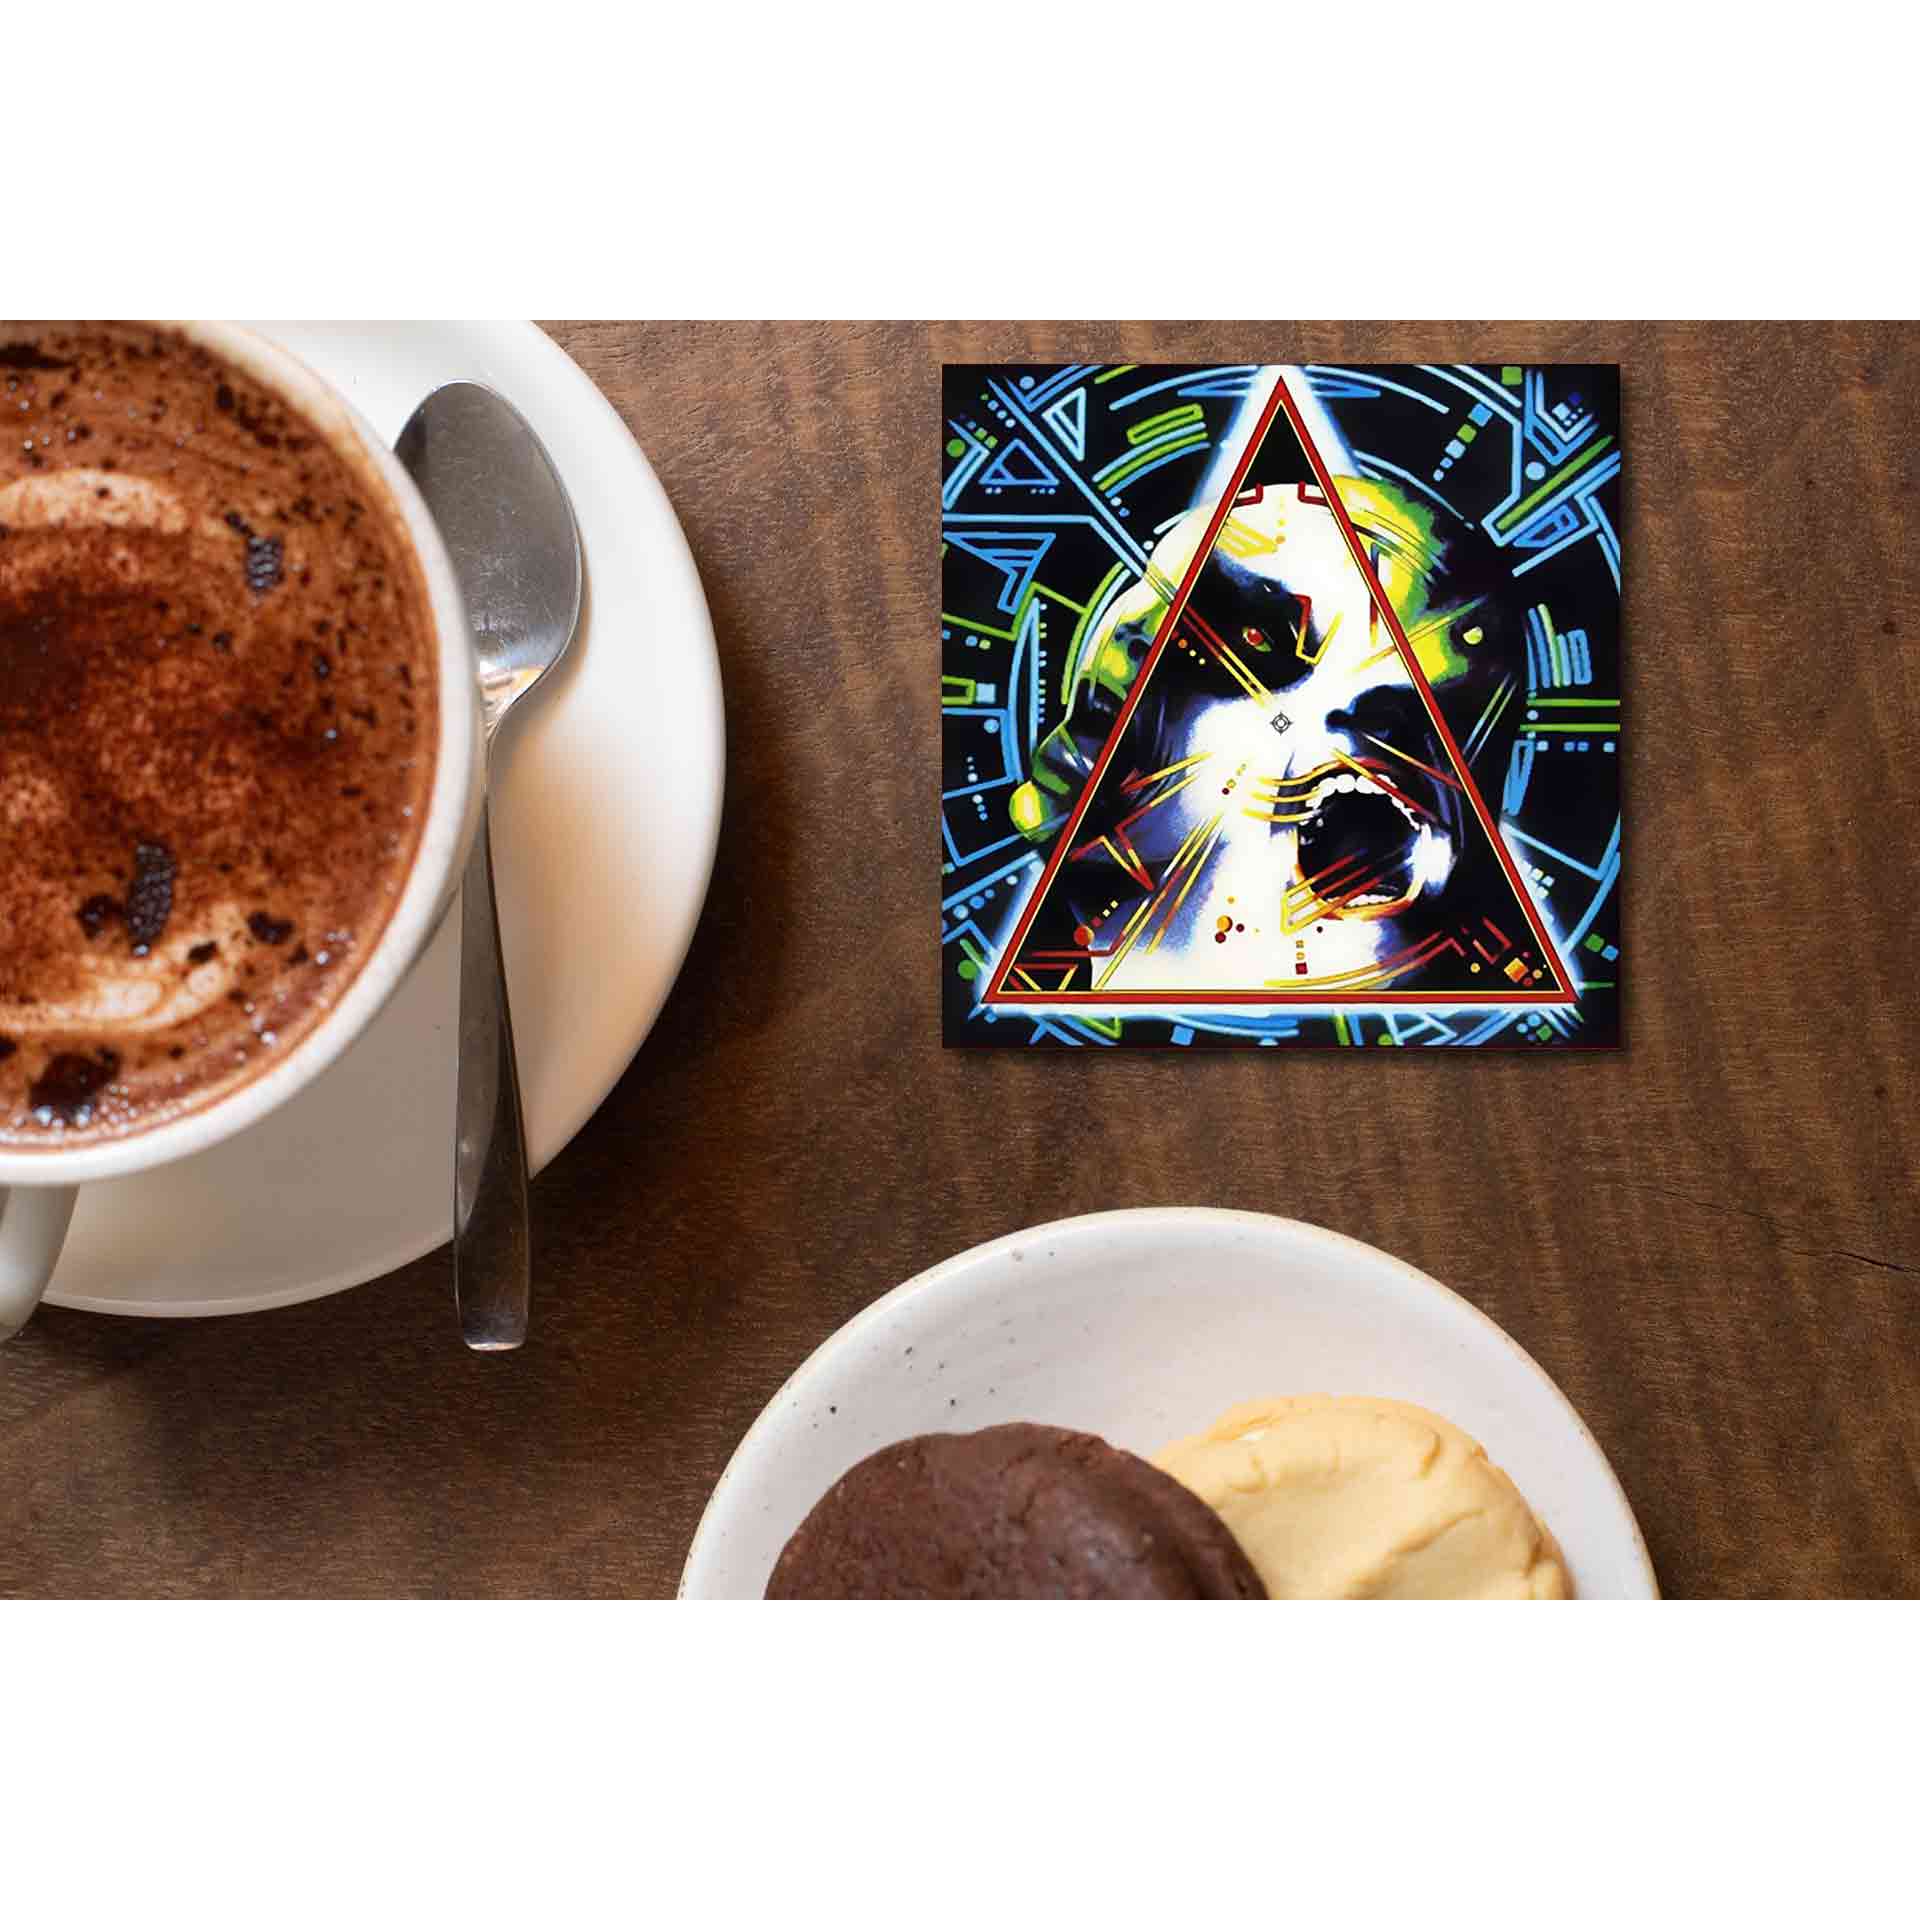 def leppard hysteria coasters wooden table cups indian music band buy online india the banyan tee tbt men women girls boys unisex